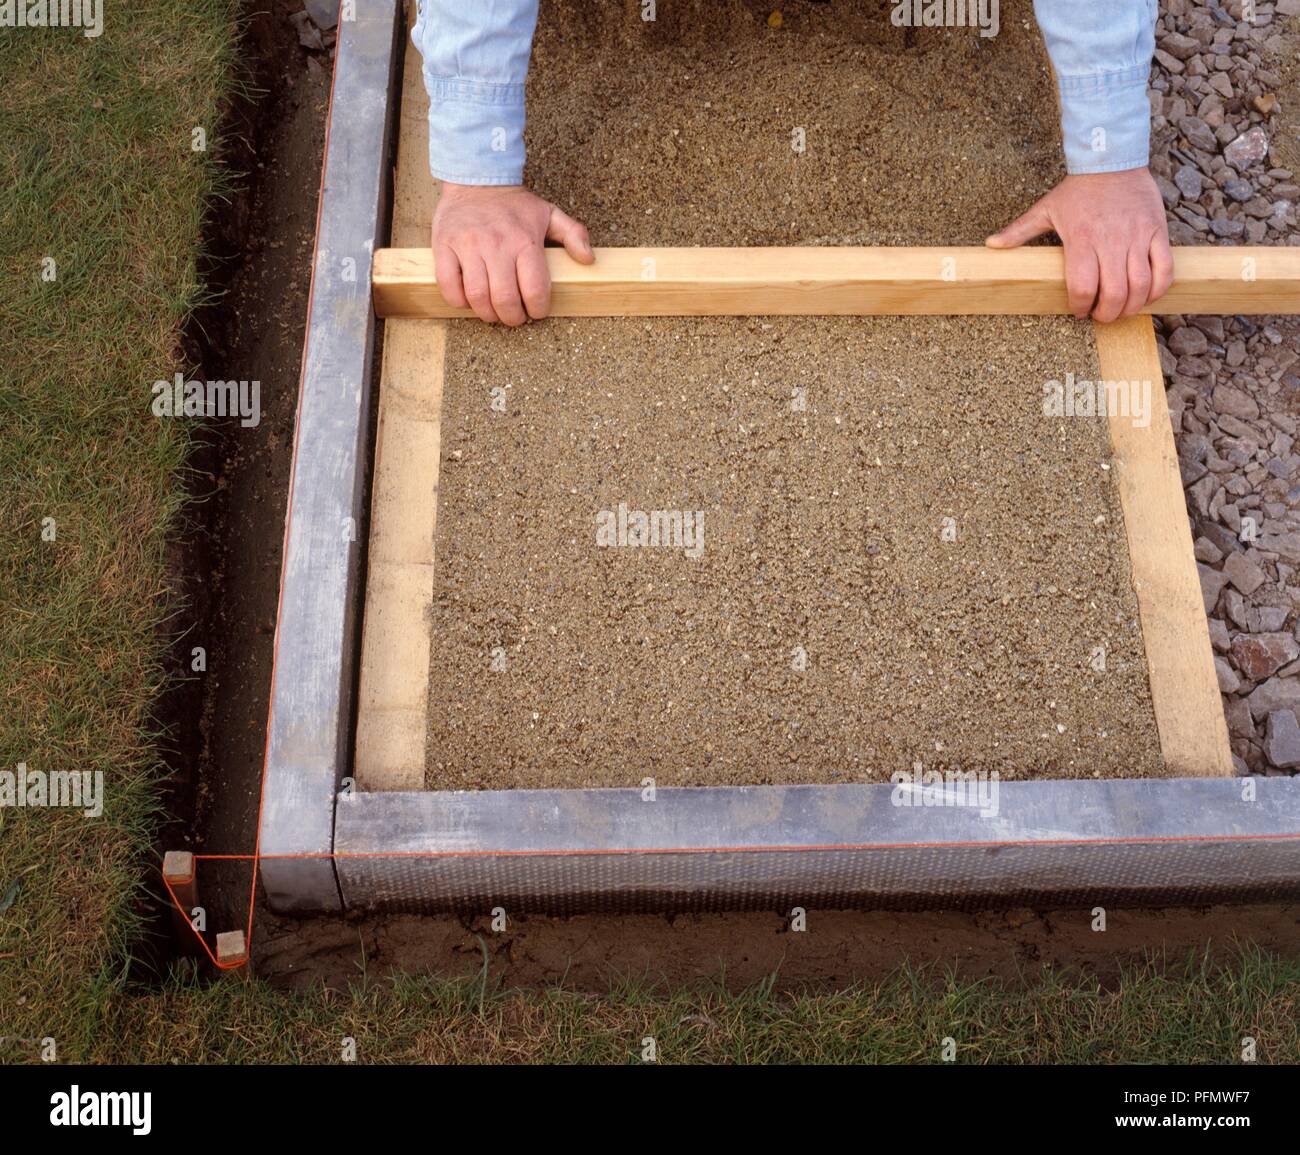 Laying a patio, levelling the sand to the tops of the battens with a length of wood, close-up Stock Photo